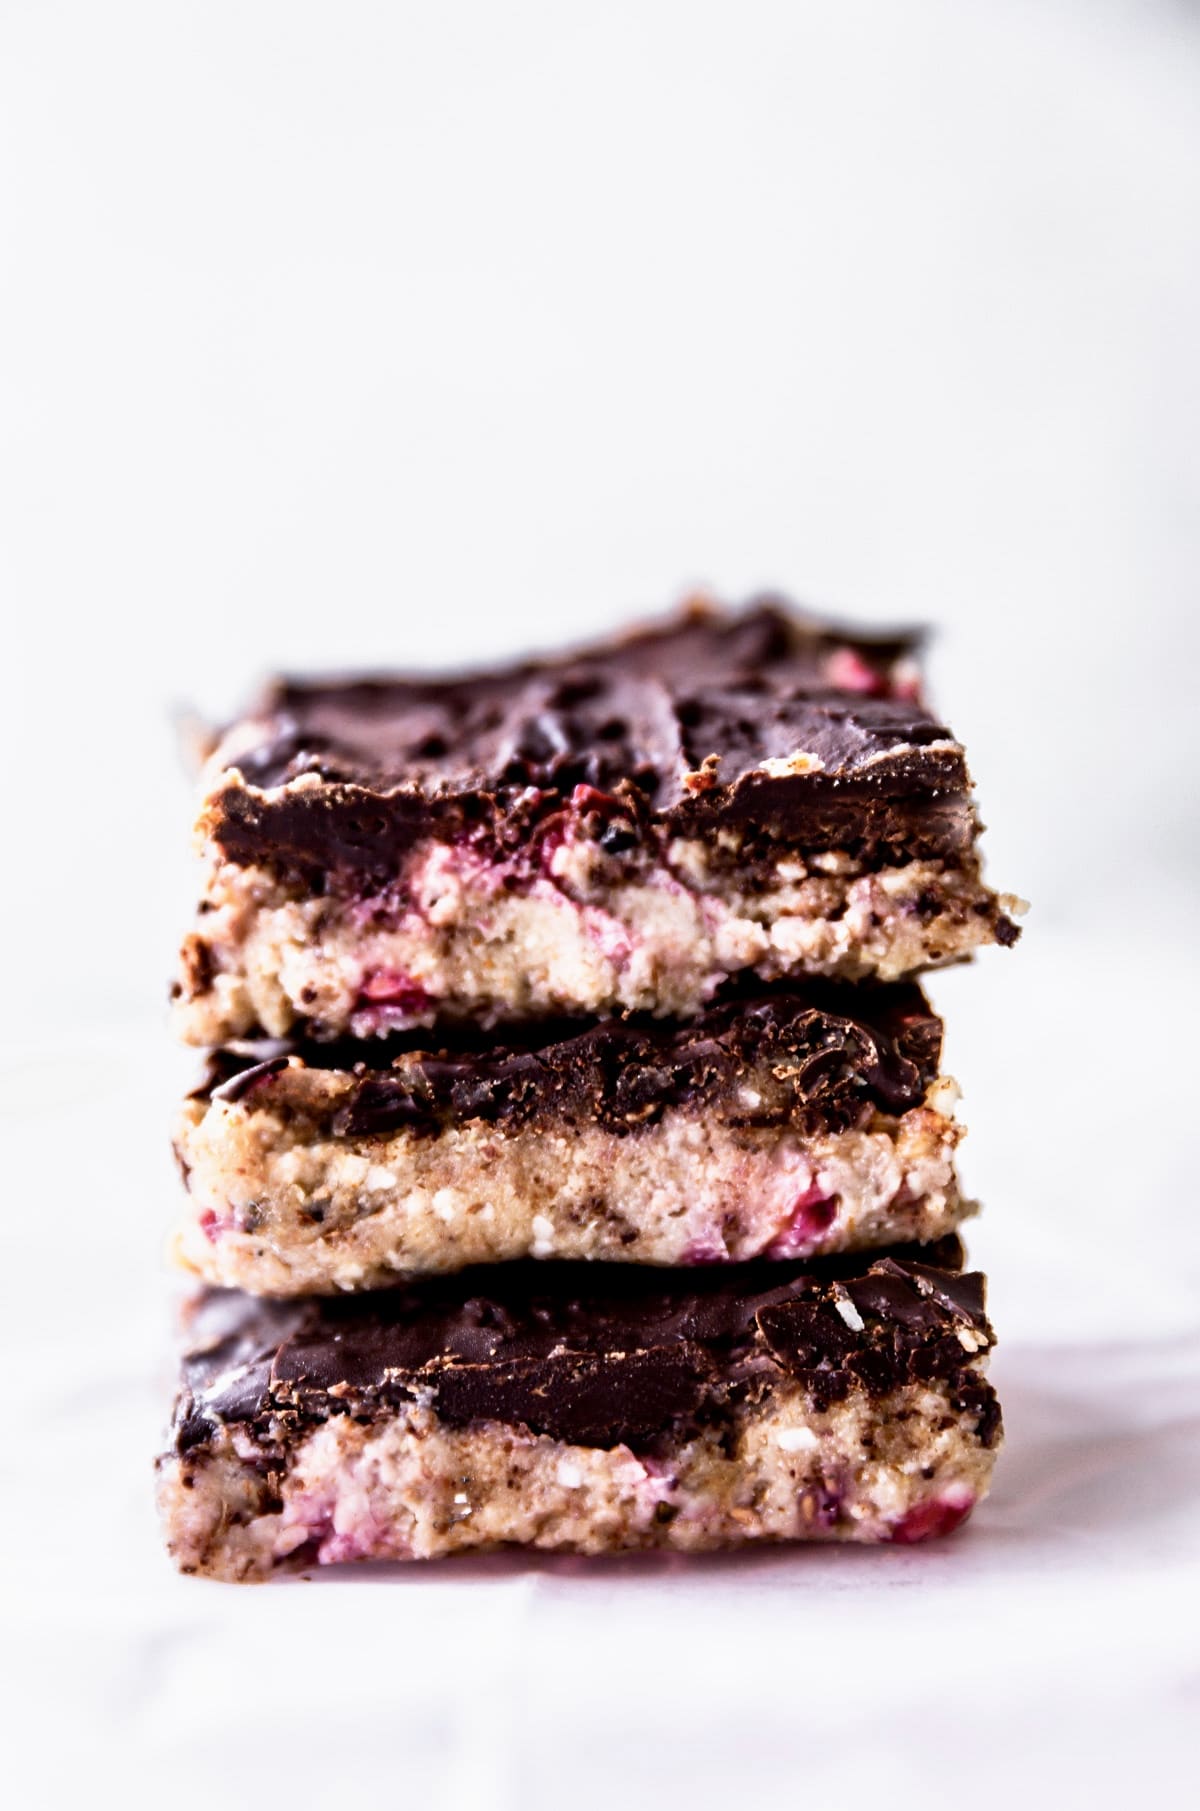 Stack of no bake chocolate almond protein bars with dried fruit, topped with chocolate